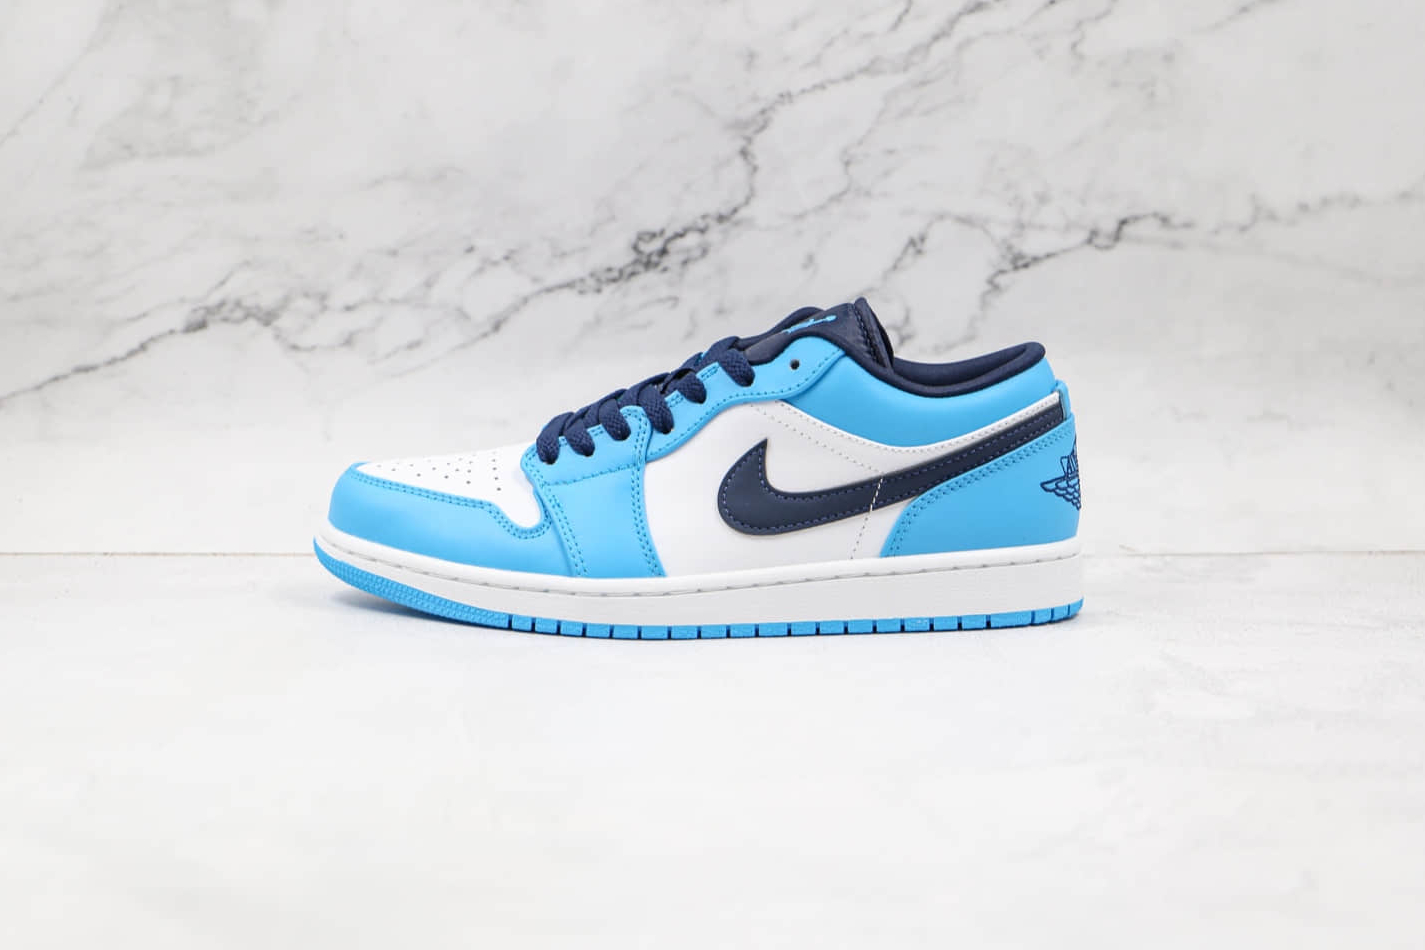 Air Jordan 1 Low 'Ture Blue' 553558-412 - Iconic Style and Supreme Comfort